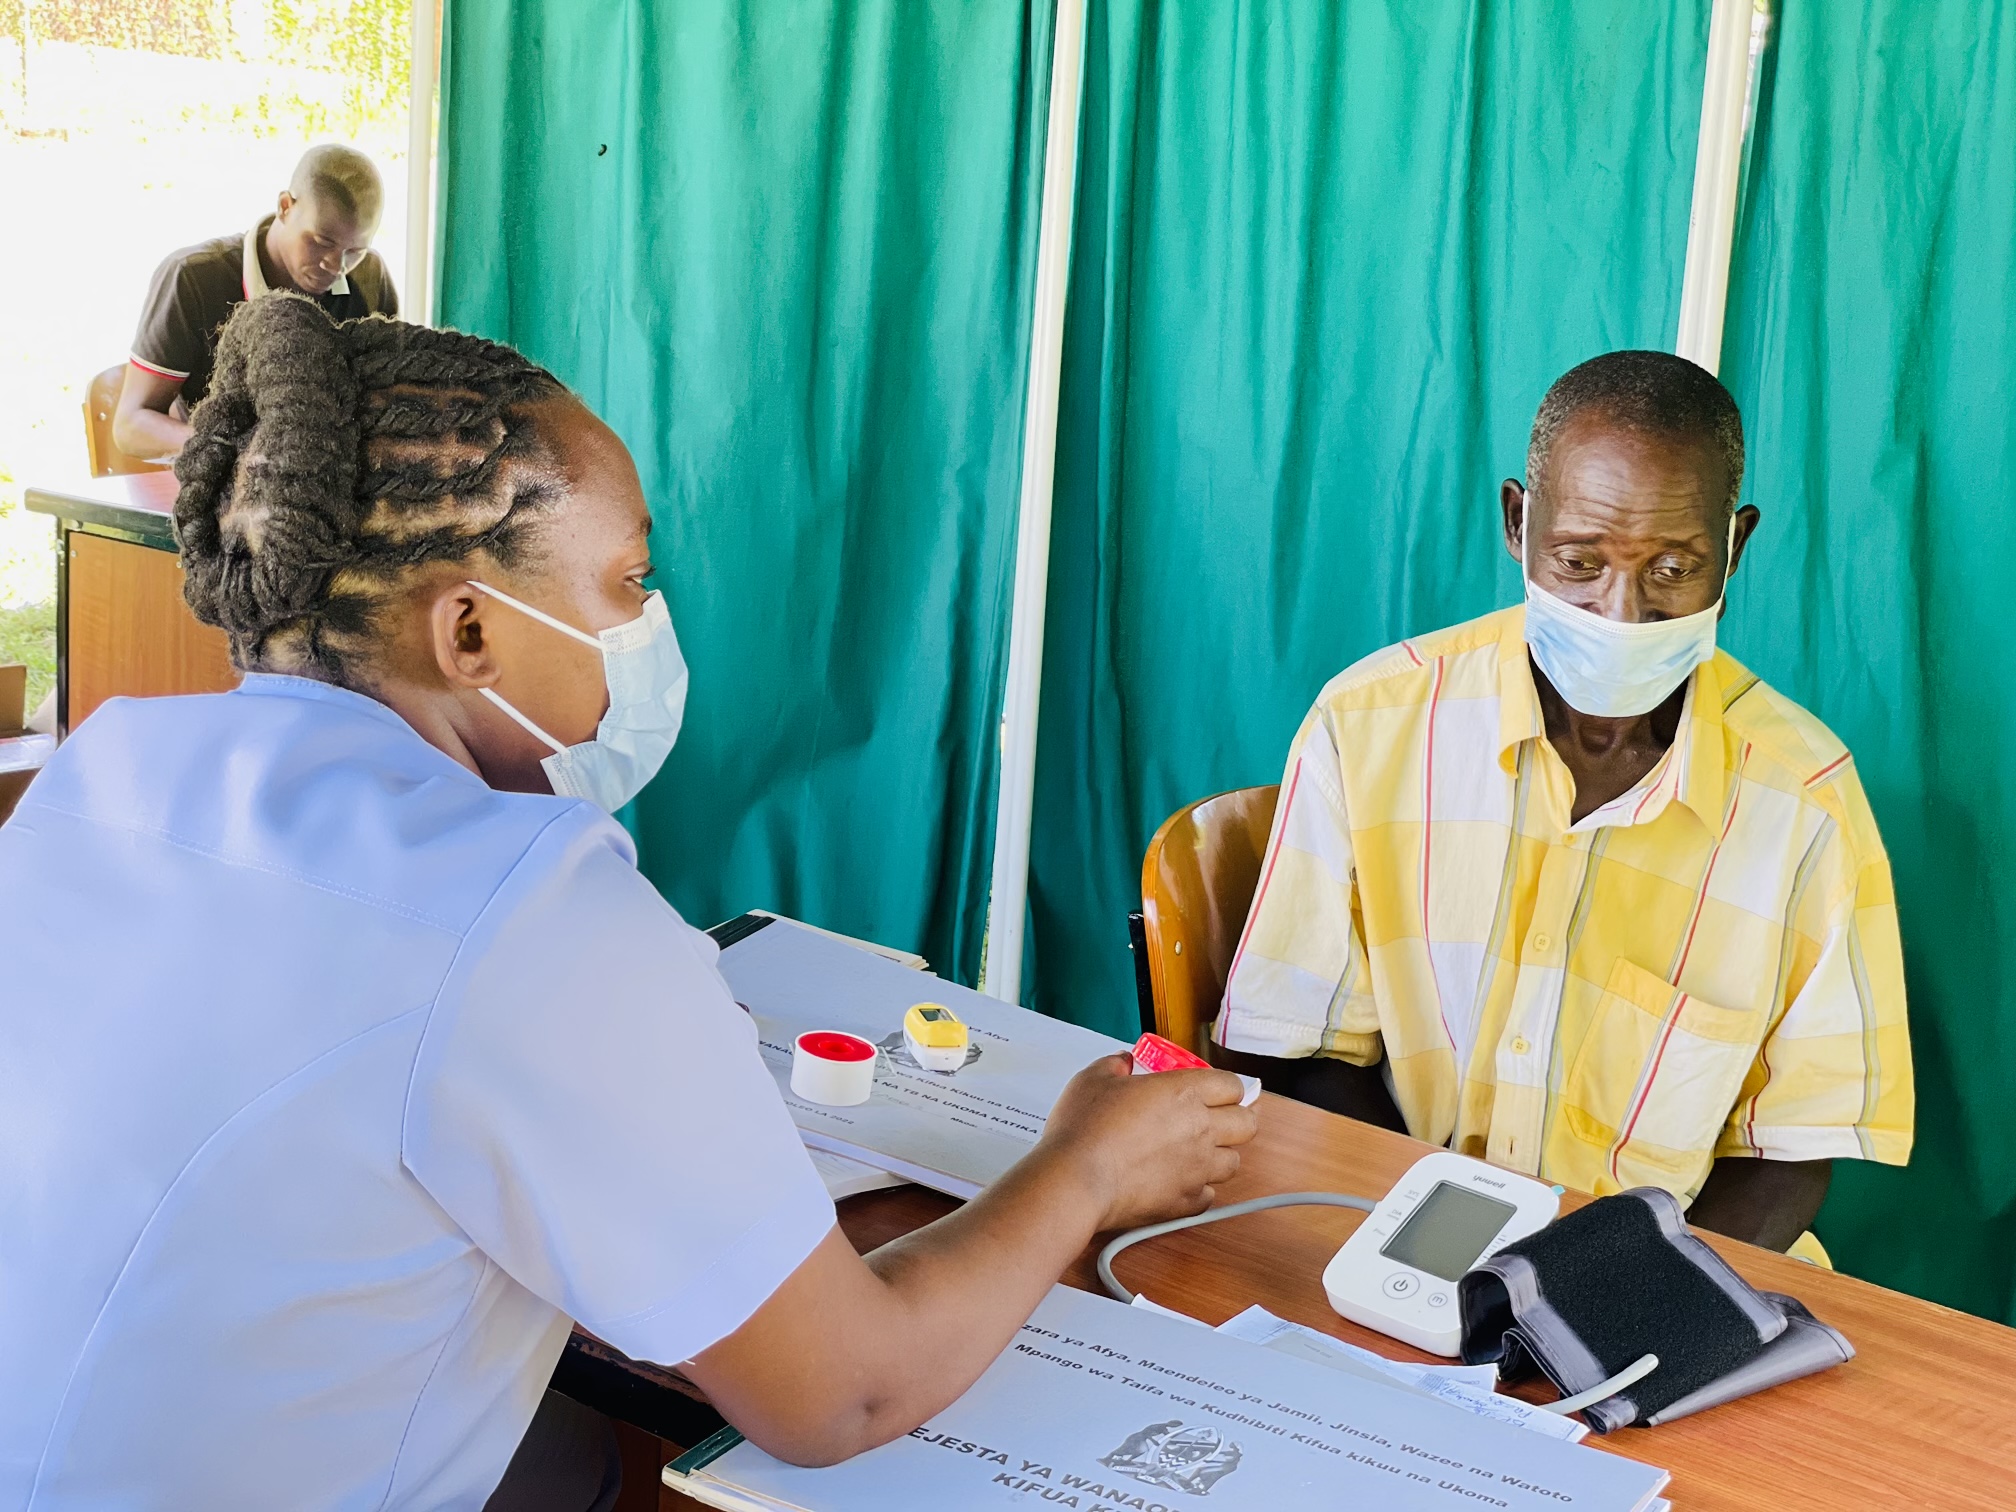 TB DAY: Community engagement to combat the disease